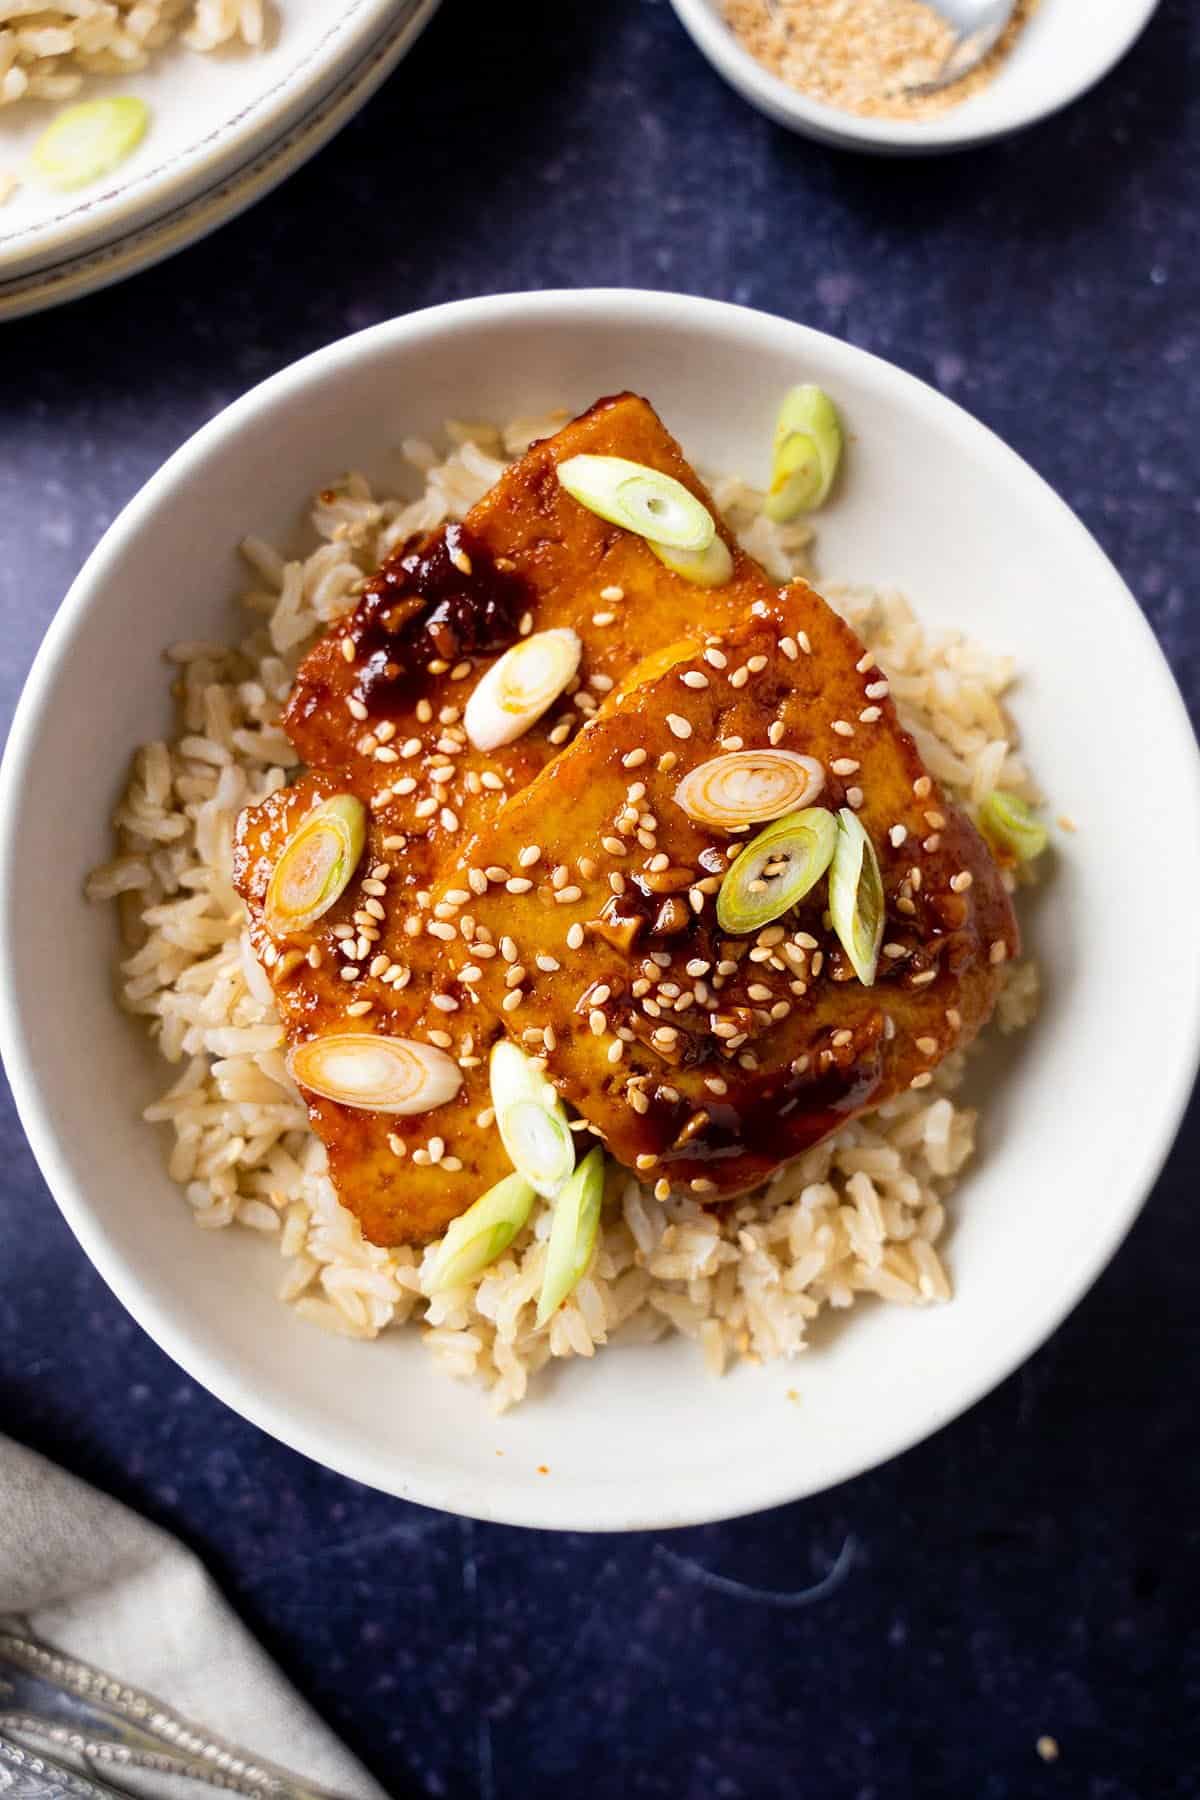 Slices of gochujang tofu with spring onions, sesame seeds and rice.